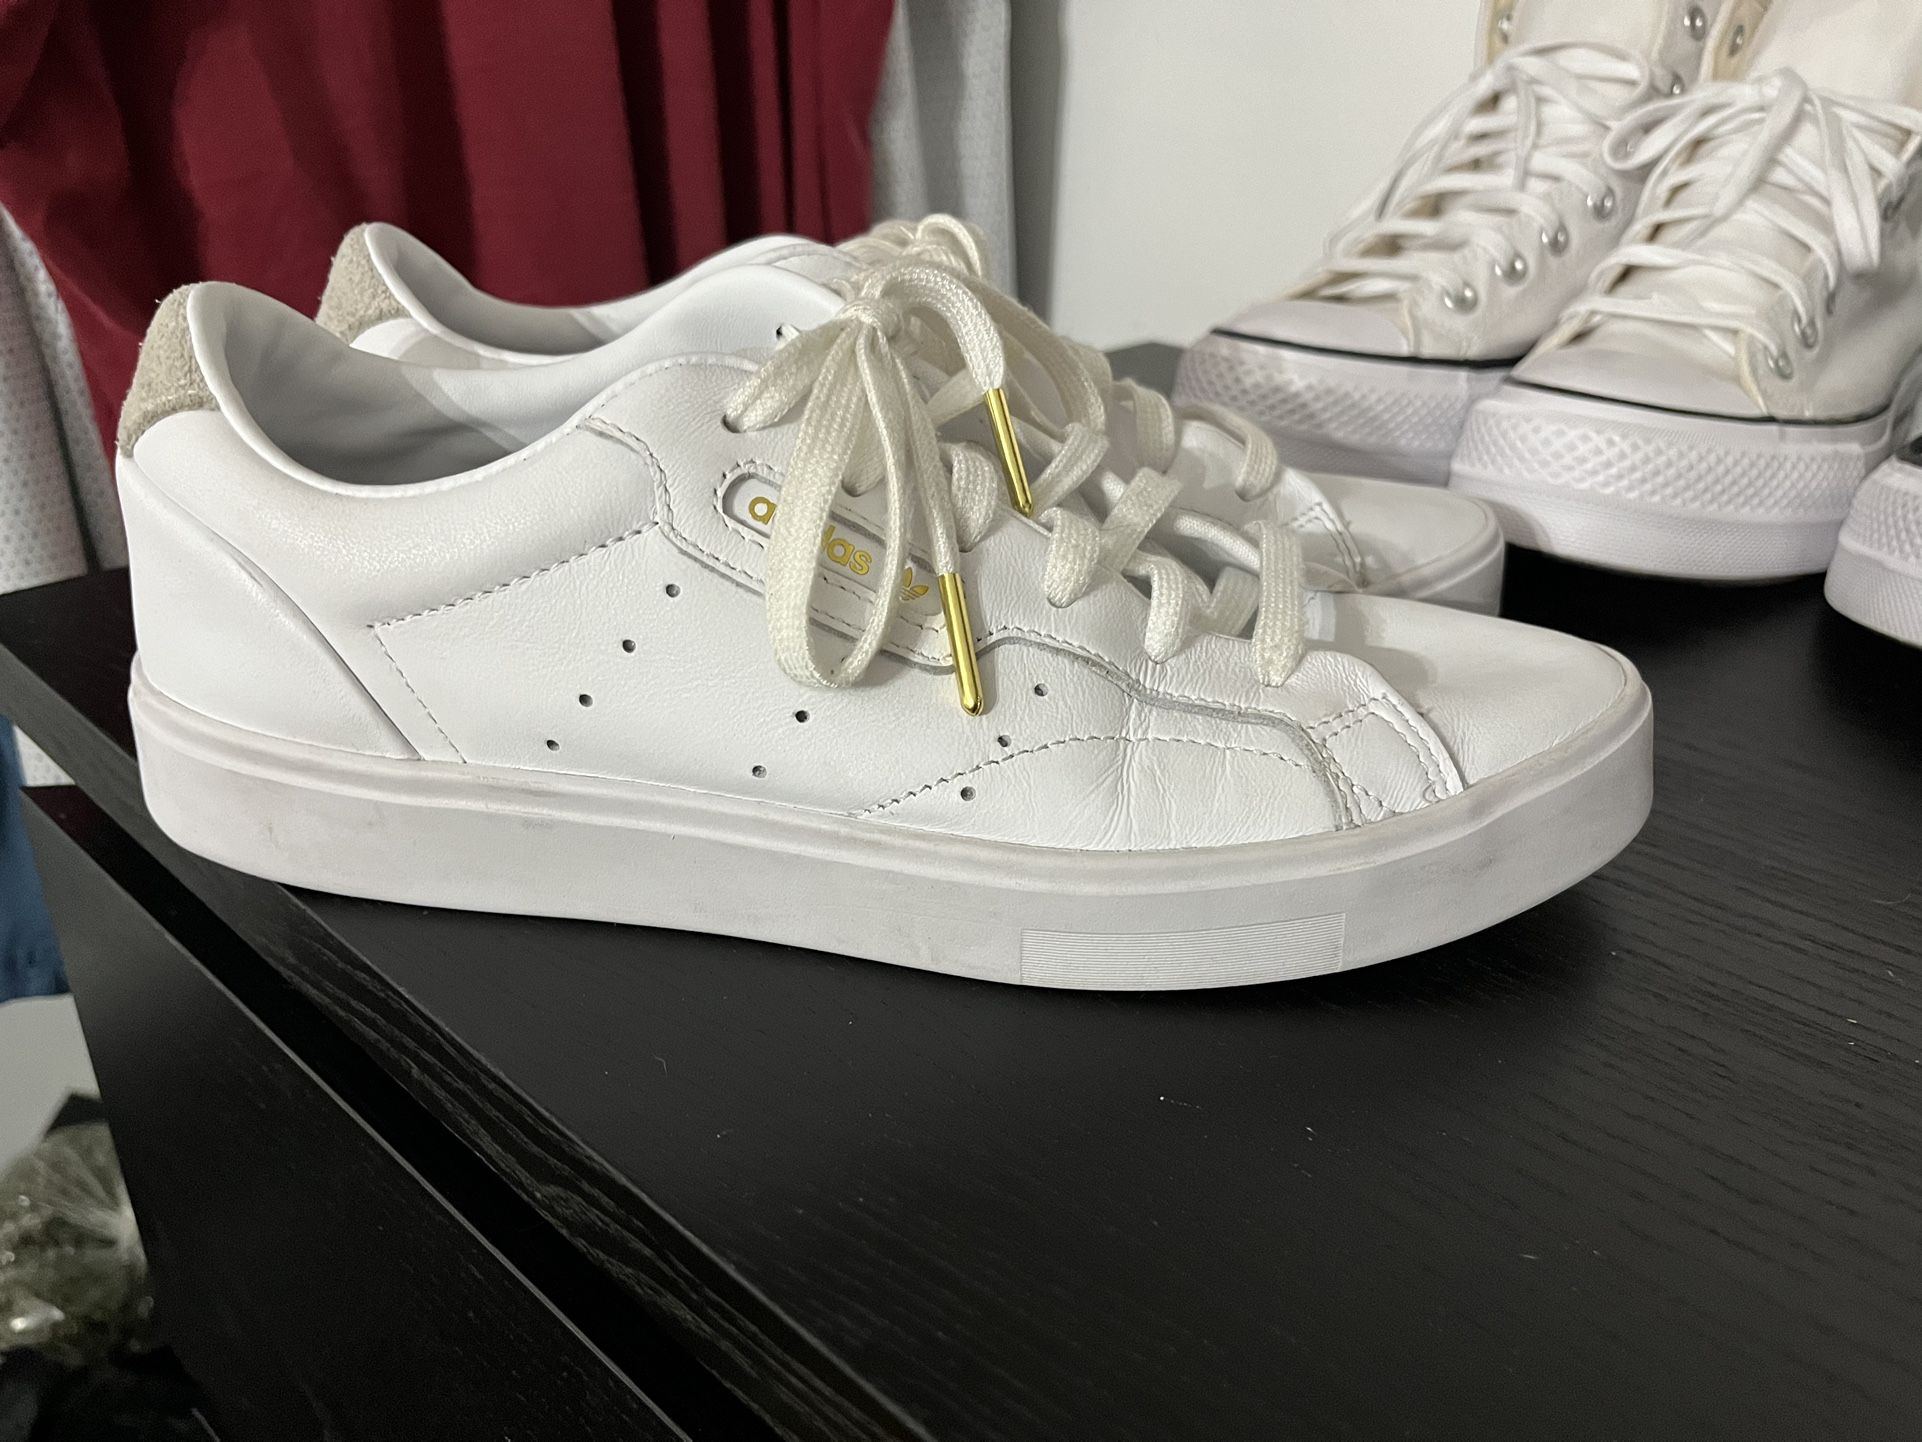 I Have Those Louis Vuitton For Sale I Don't Have Time To Sell Separately  for Sale in West Hollywood, CA - OfferUp